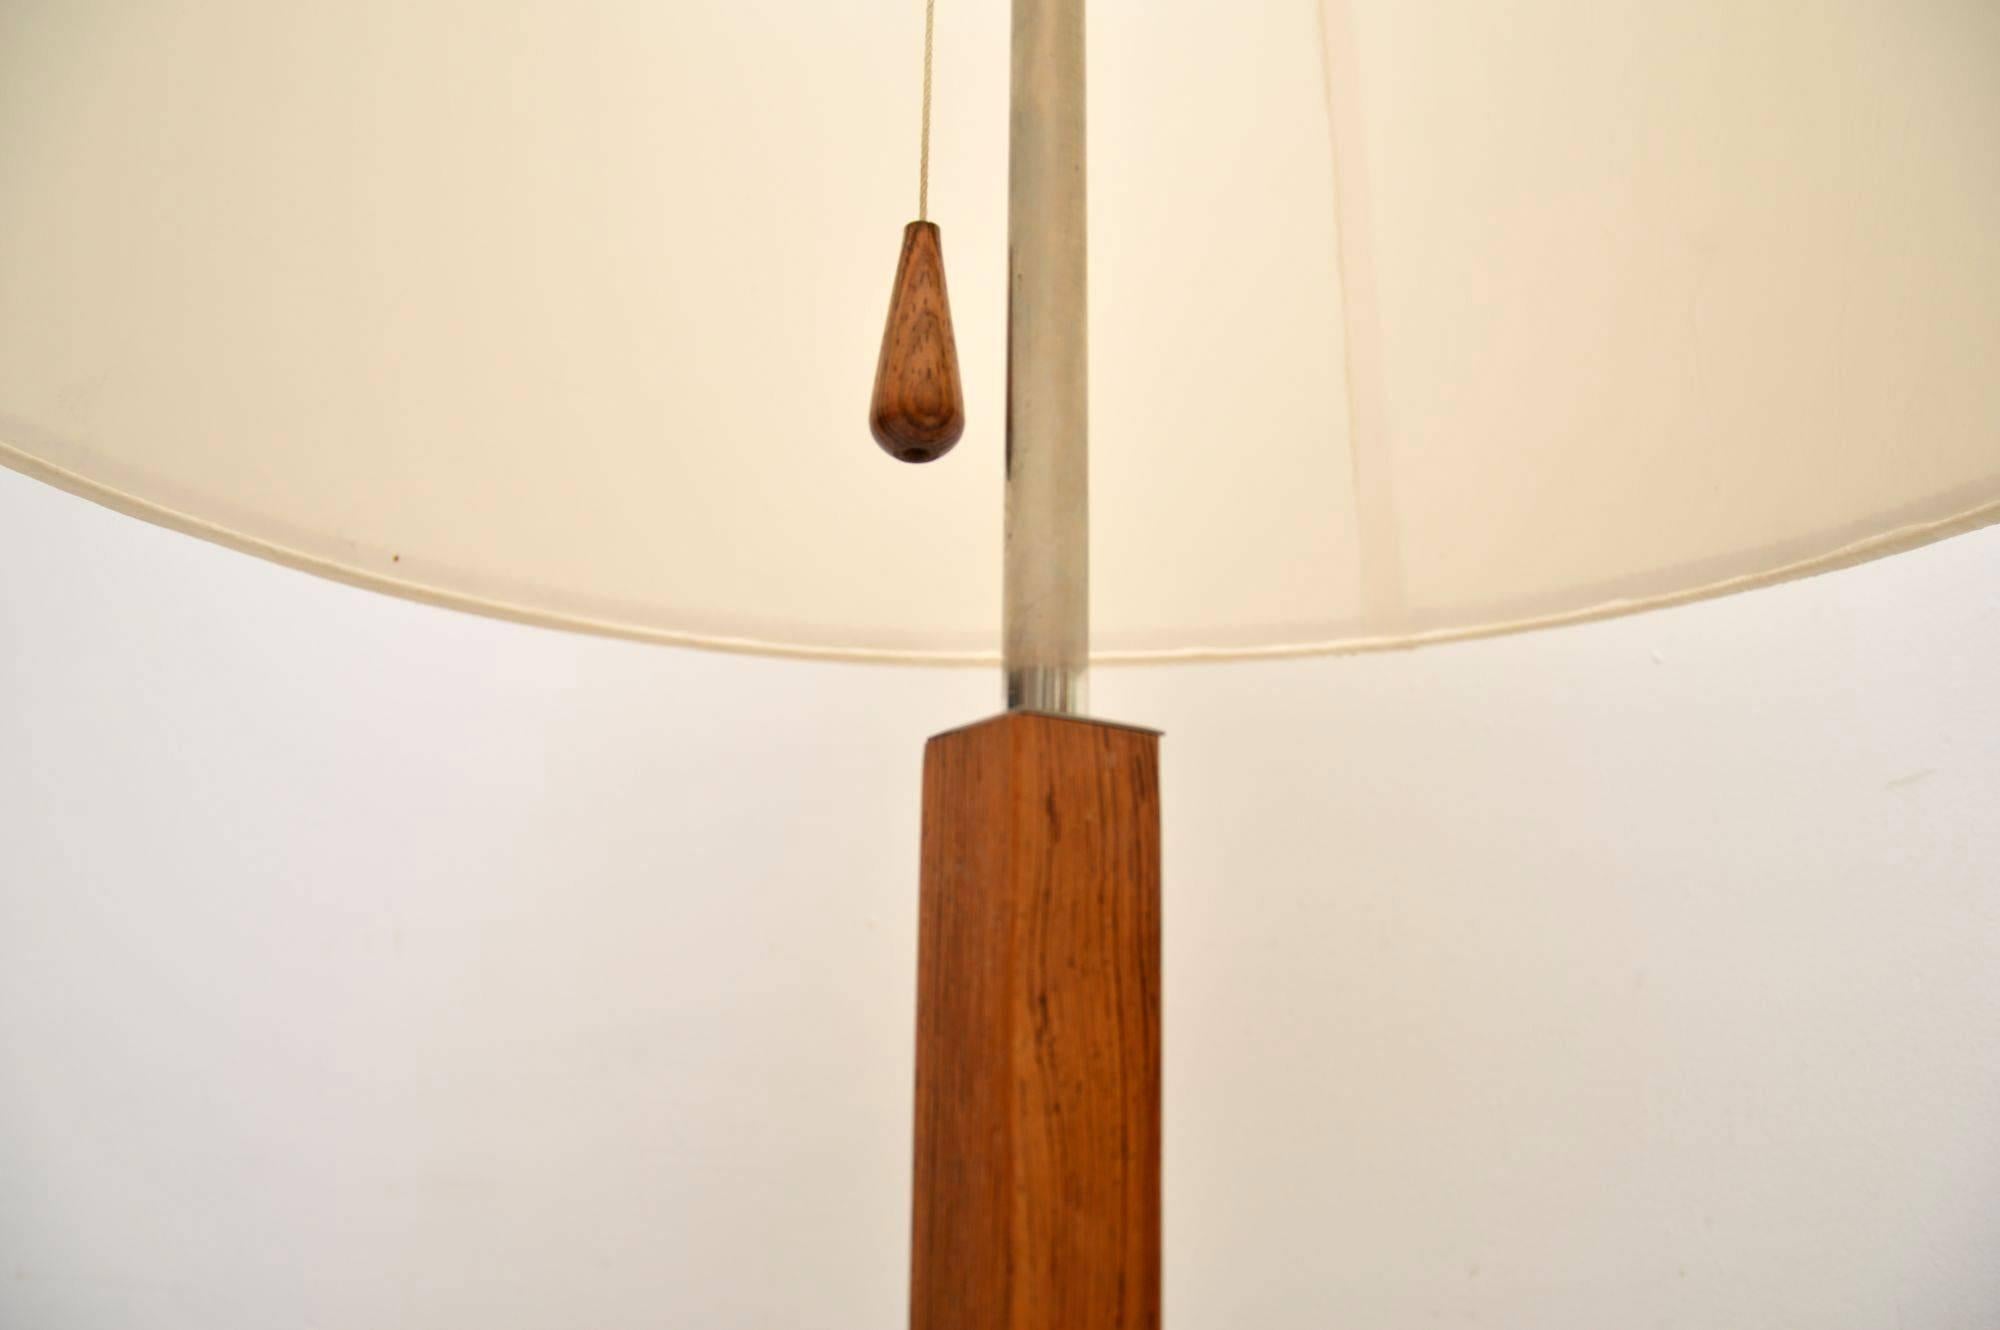 A beautiful vintage Danish standard lamp in wood and chrome, this dates from the 1960s. It’s in excellent condition for its age, with only some extremely minor wear here and there. We have had this re-wired, it’s in good working order.

Measure: